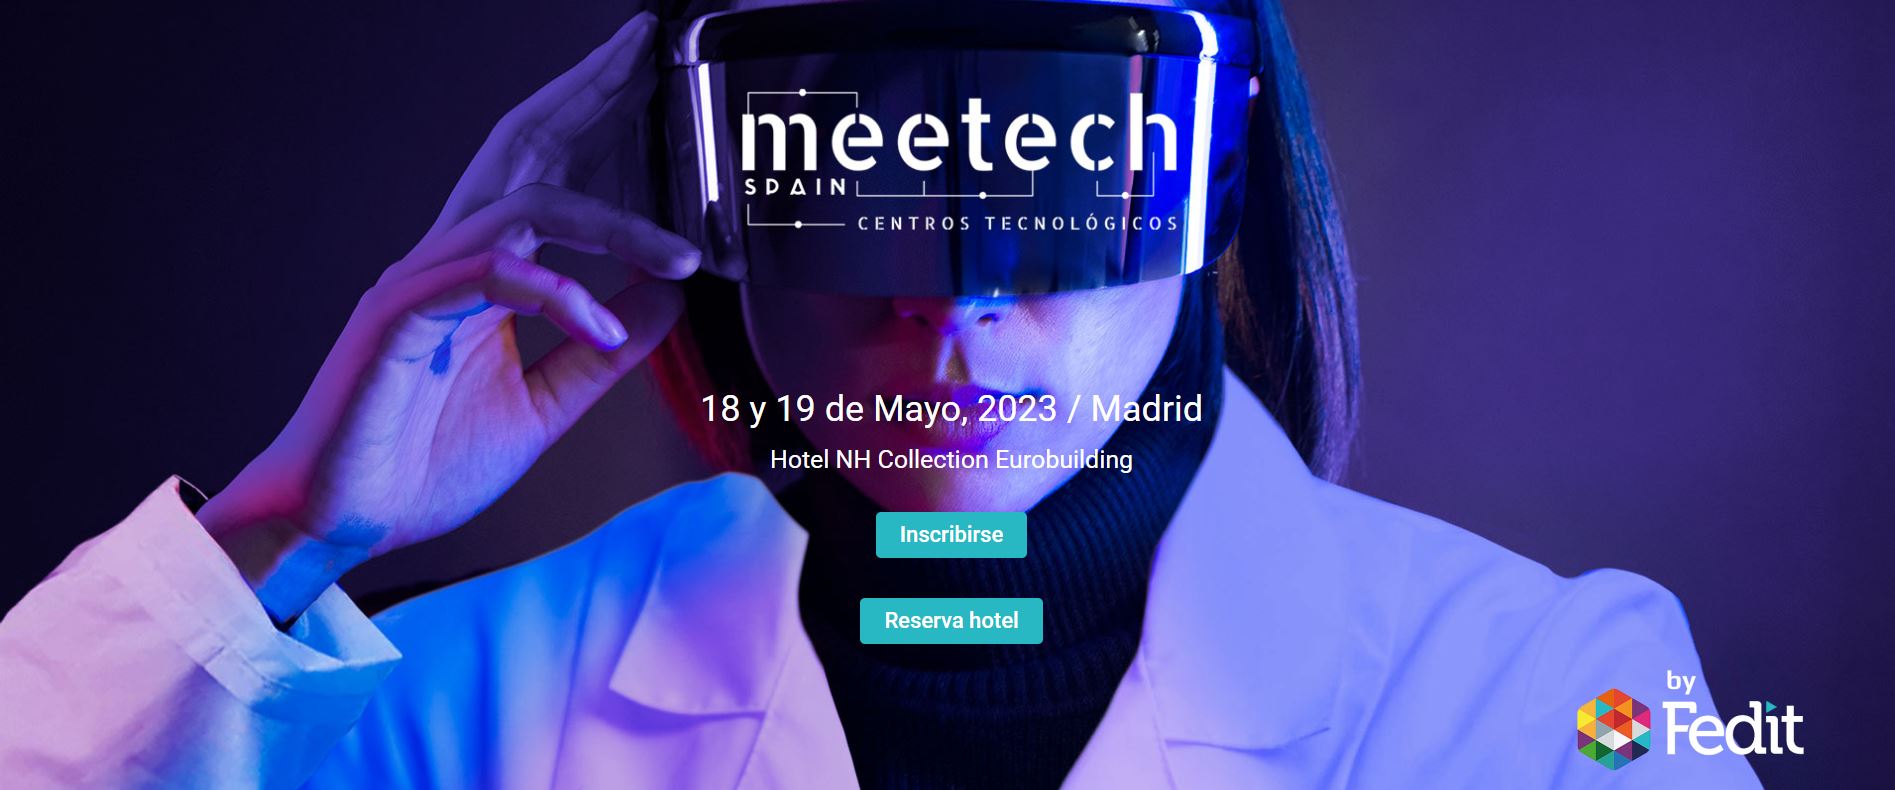 AI success stories applied to manufacturing, IDEKO’s proposal for Meetech Spain